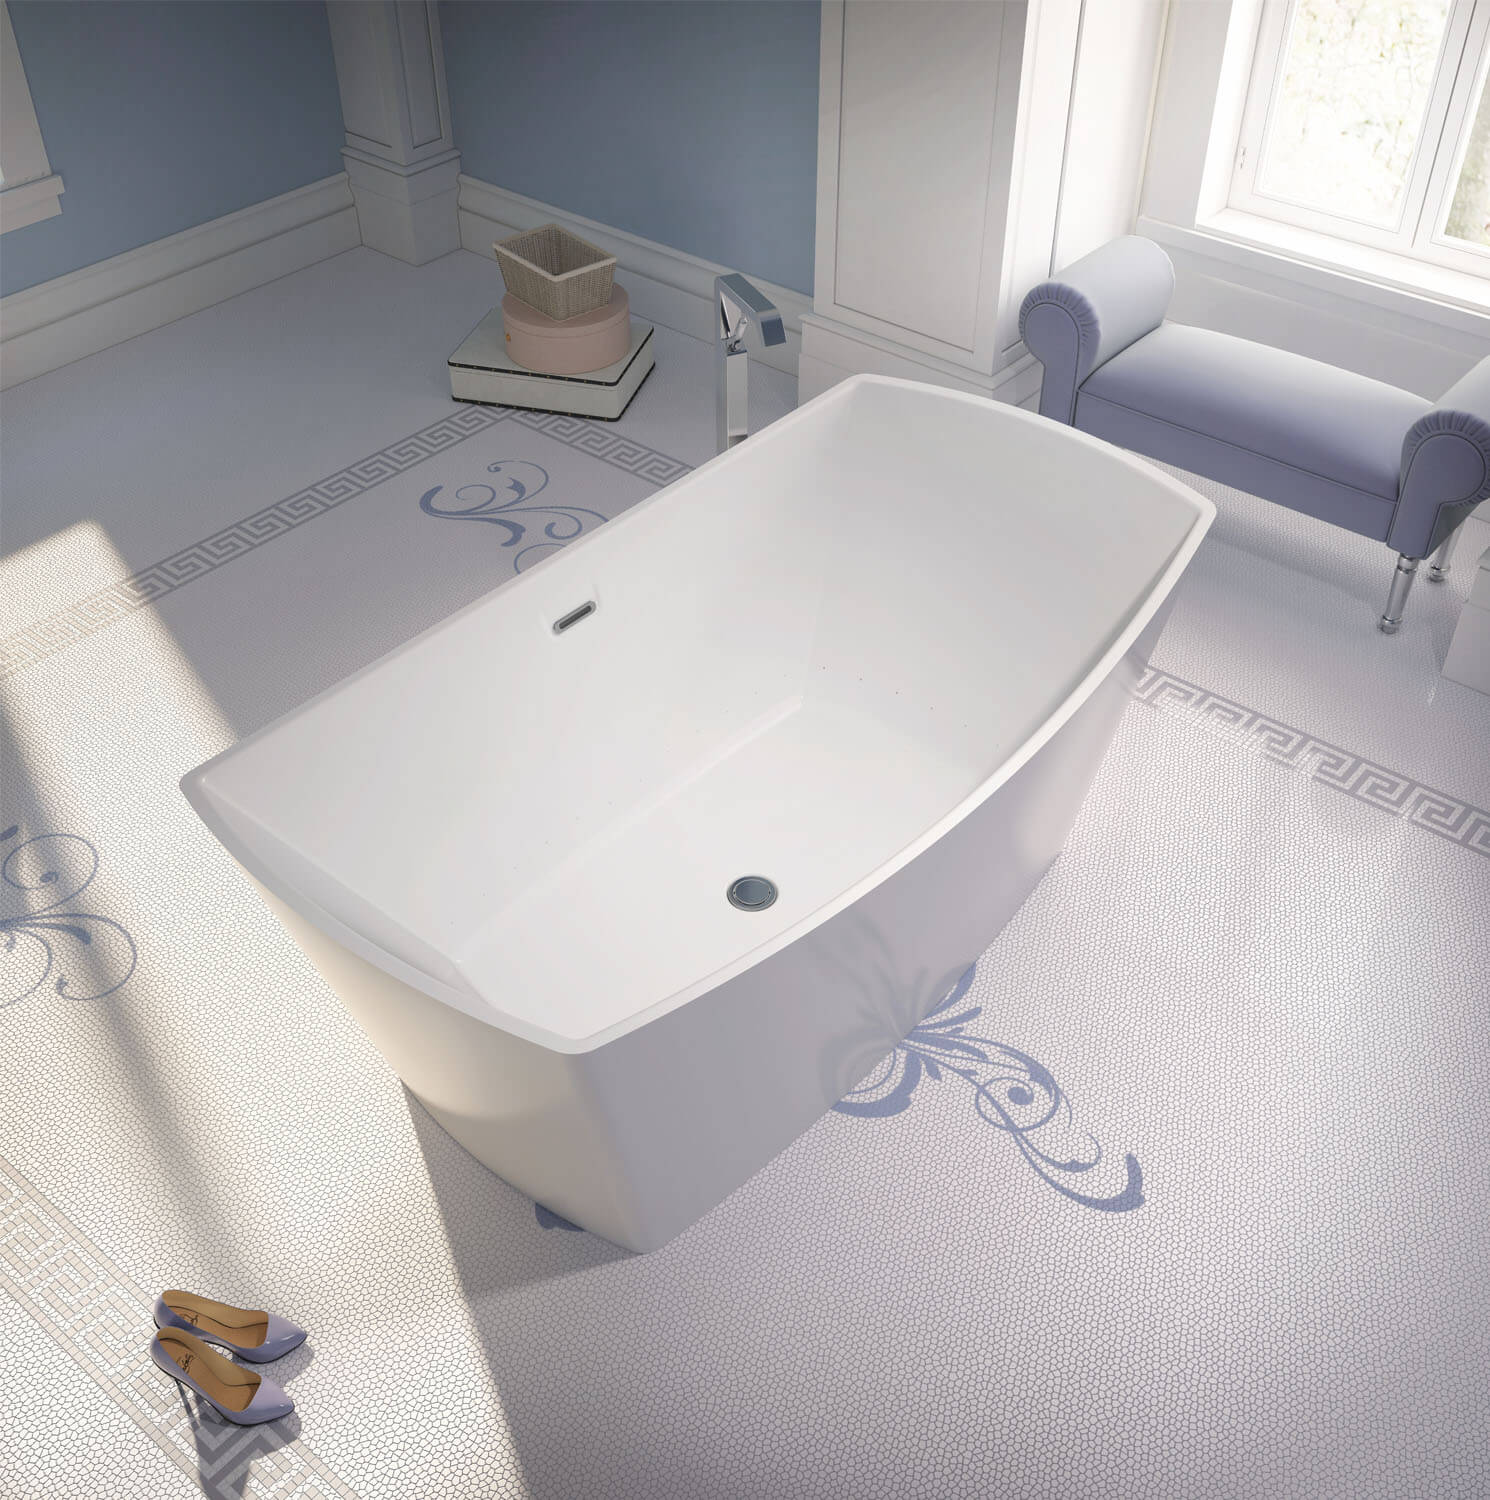 Bainultra Evanescence® 6634 two person freestanding air jet bathtub for your modern bathroom